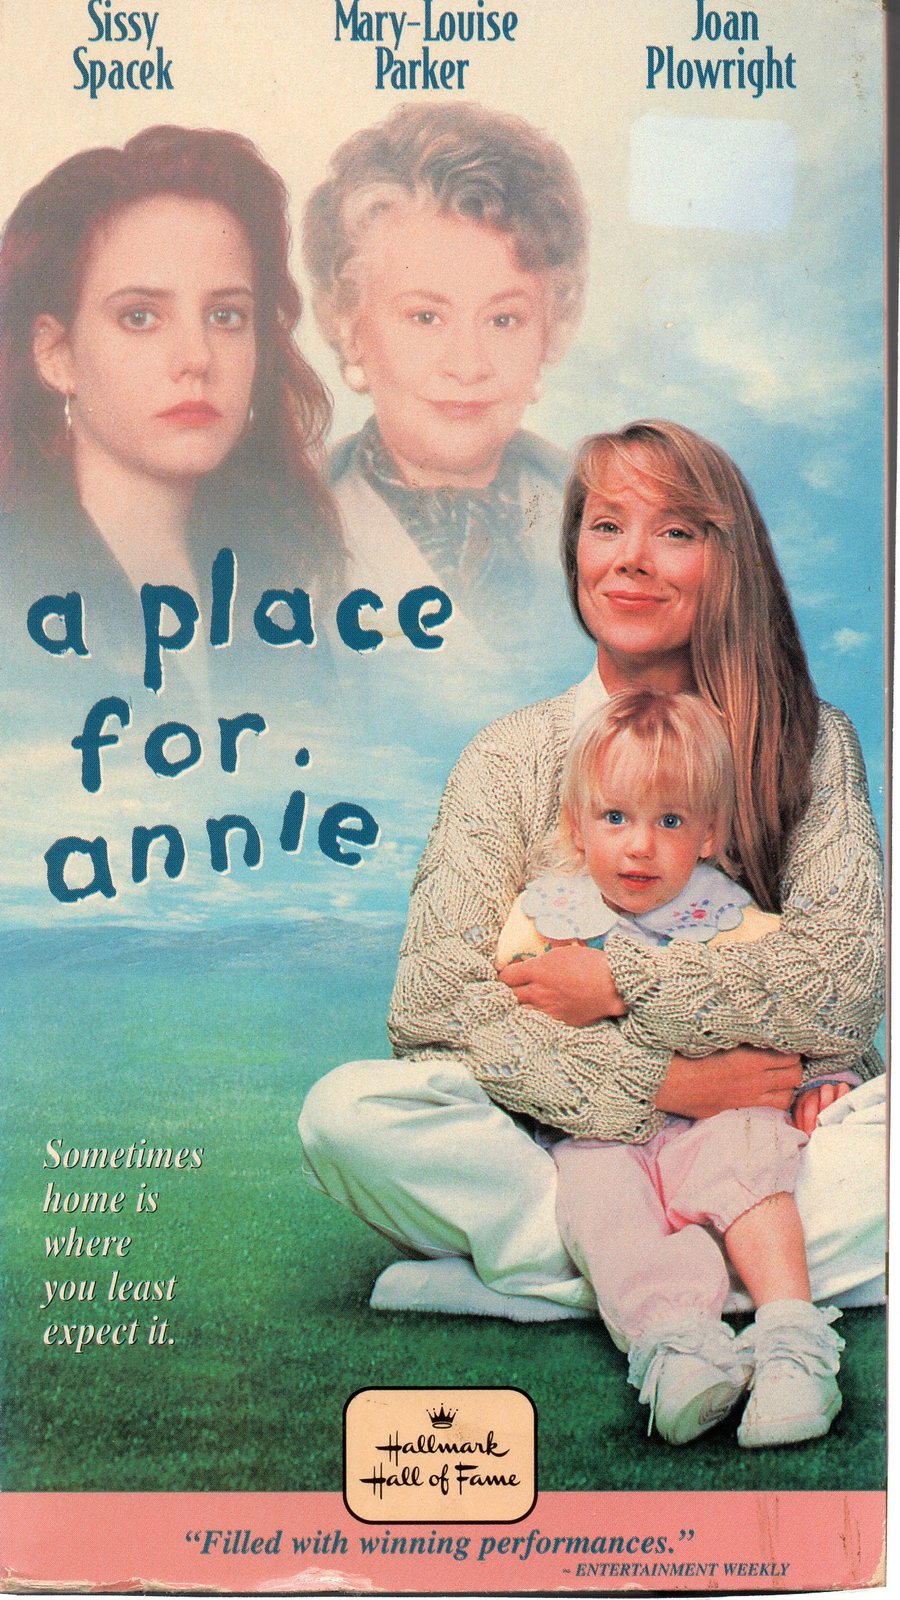 Primary image for PLACE for ANNIE (vhs) Sissy Spacek, Hallmark TV movie, deleted title not on dvd